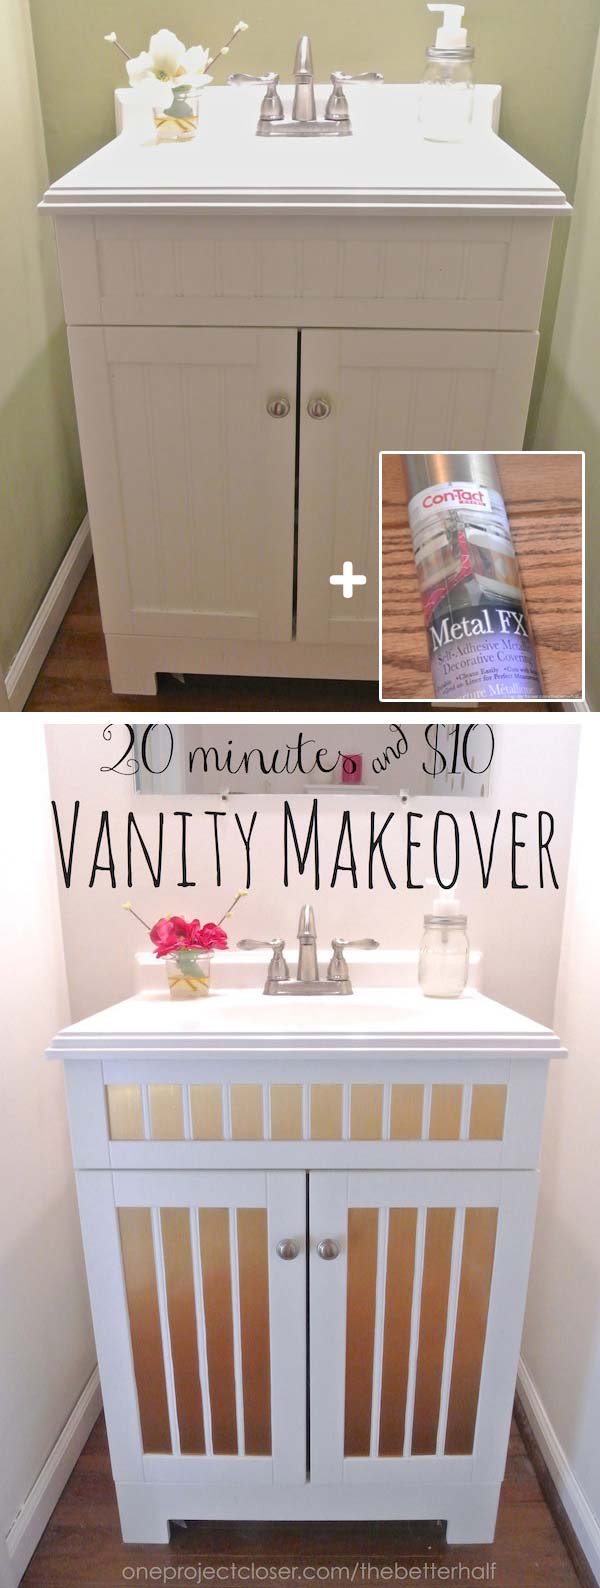 DIY Vanity Makeover with Stripe Contact Paper: The Simplest Creative Way to Reinvent Your Vanity